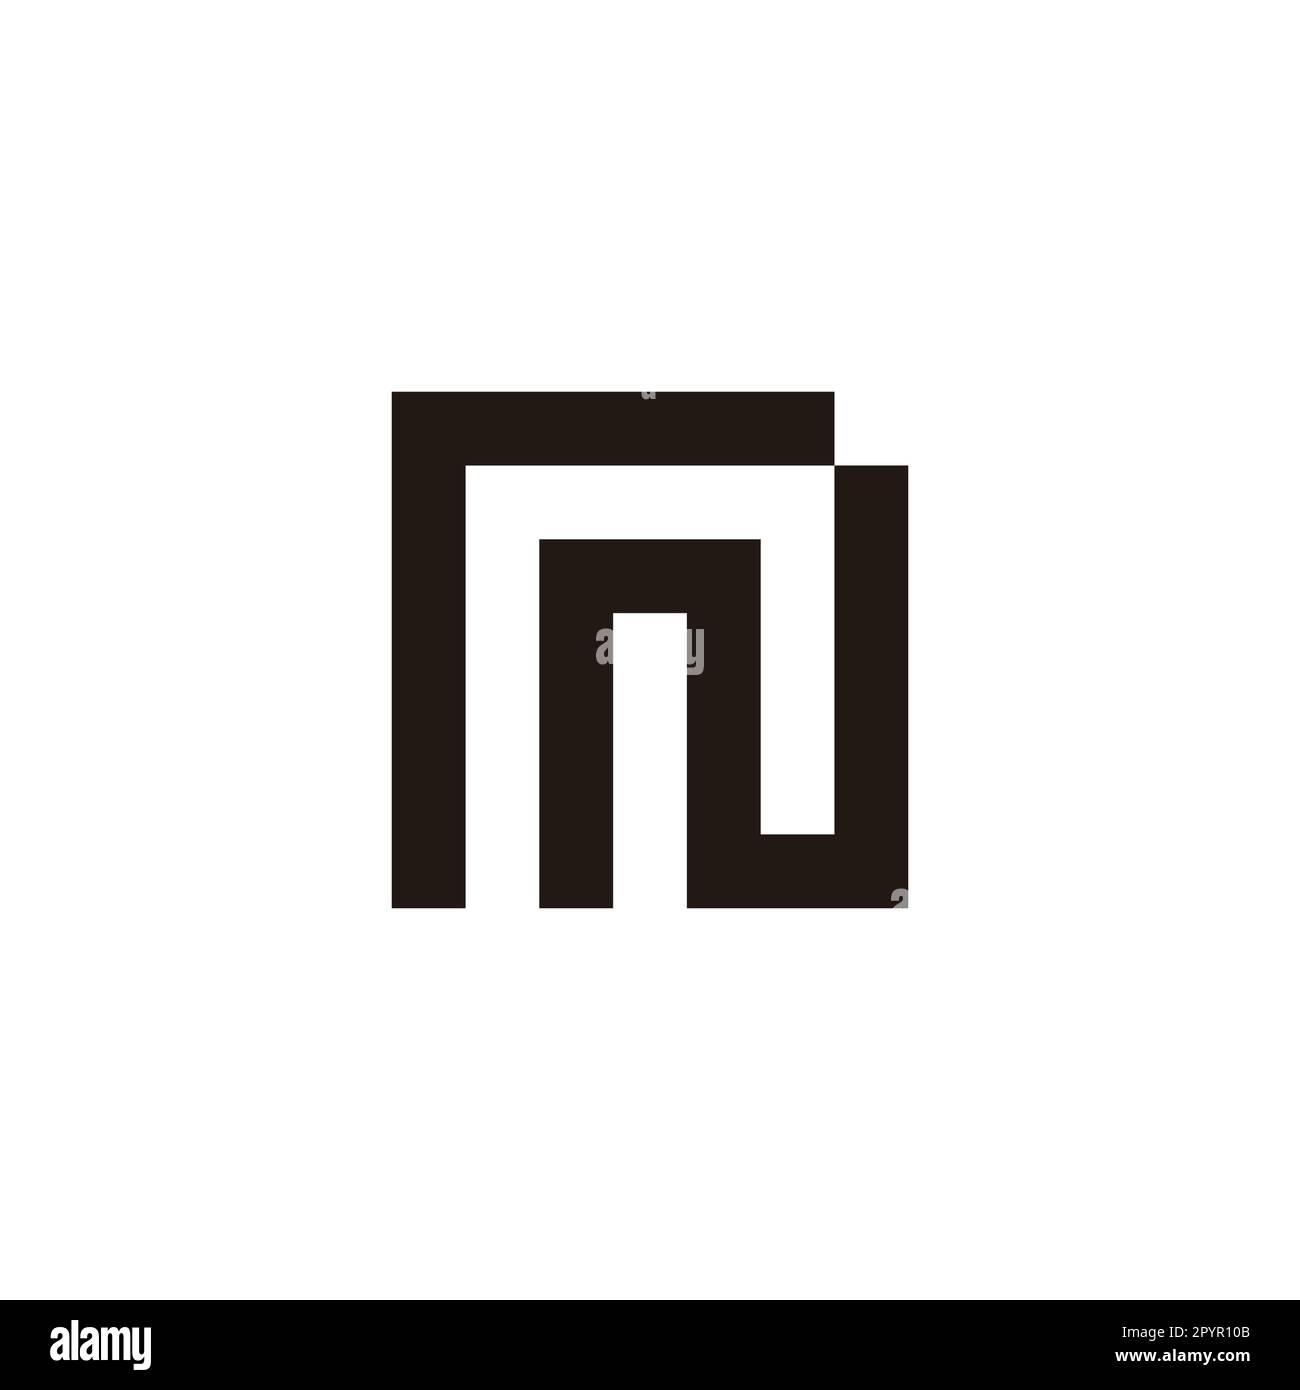 Letter r and N square geometric symbol simple logo vector Stock Vector